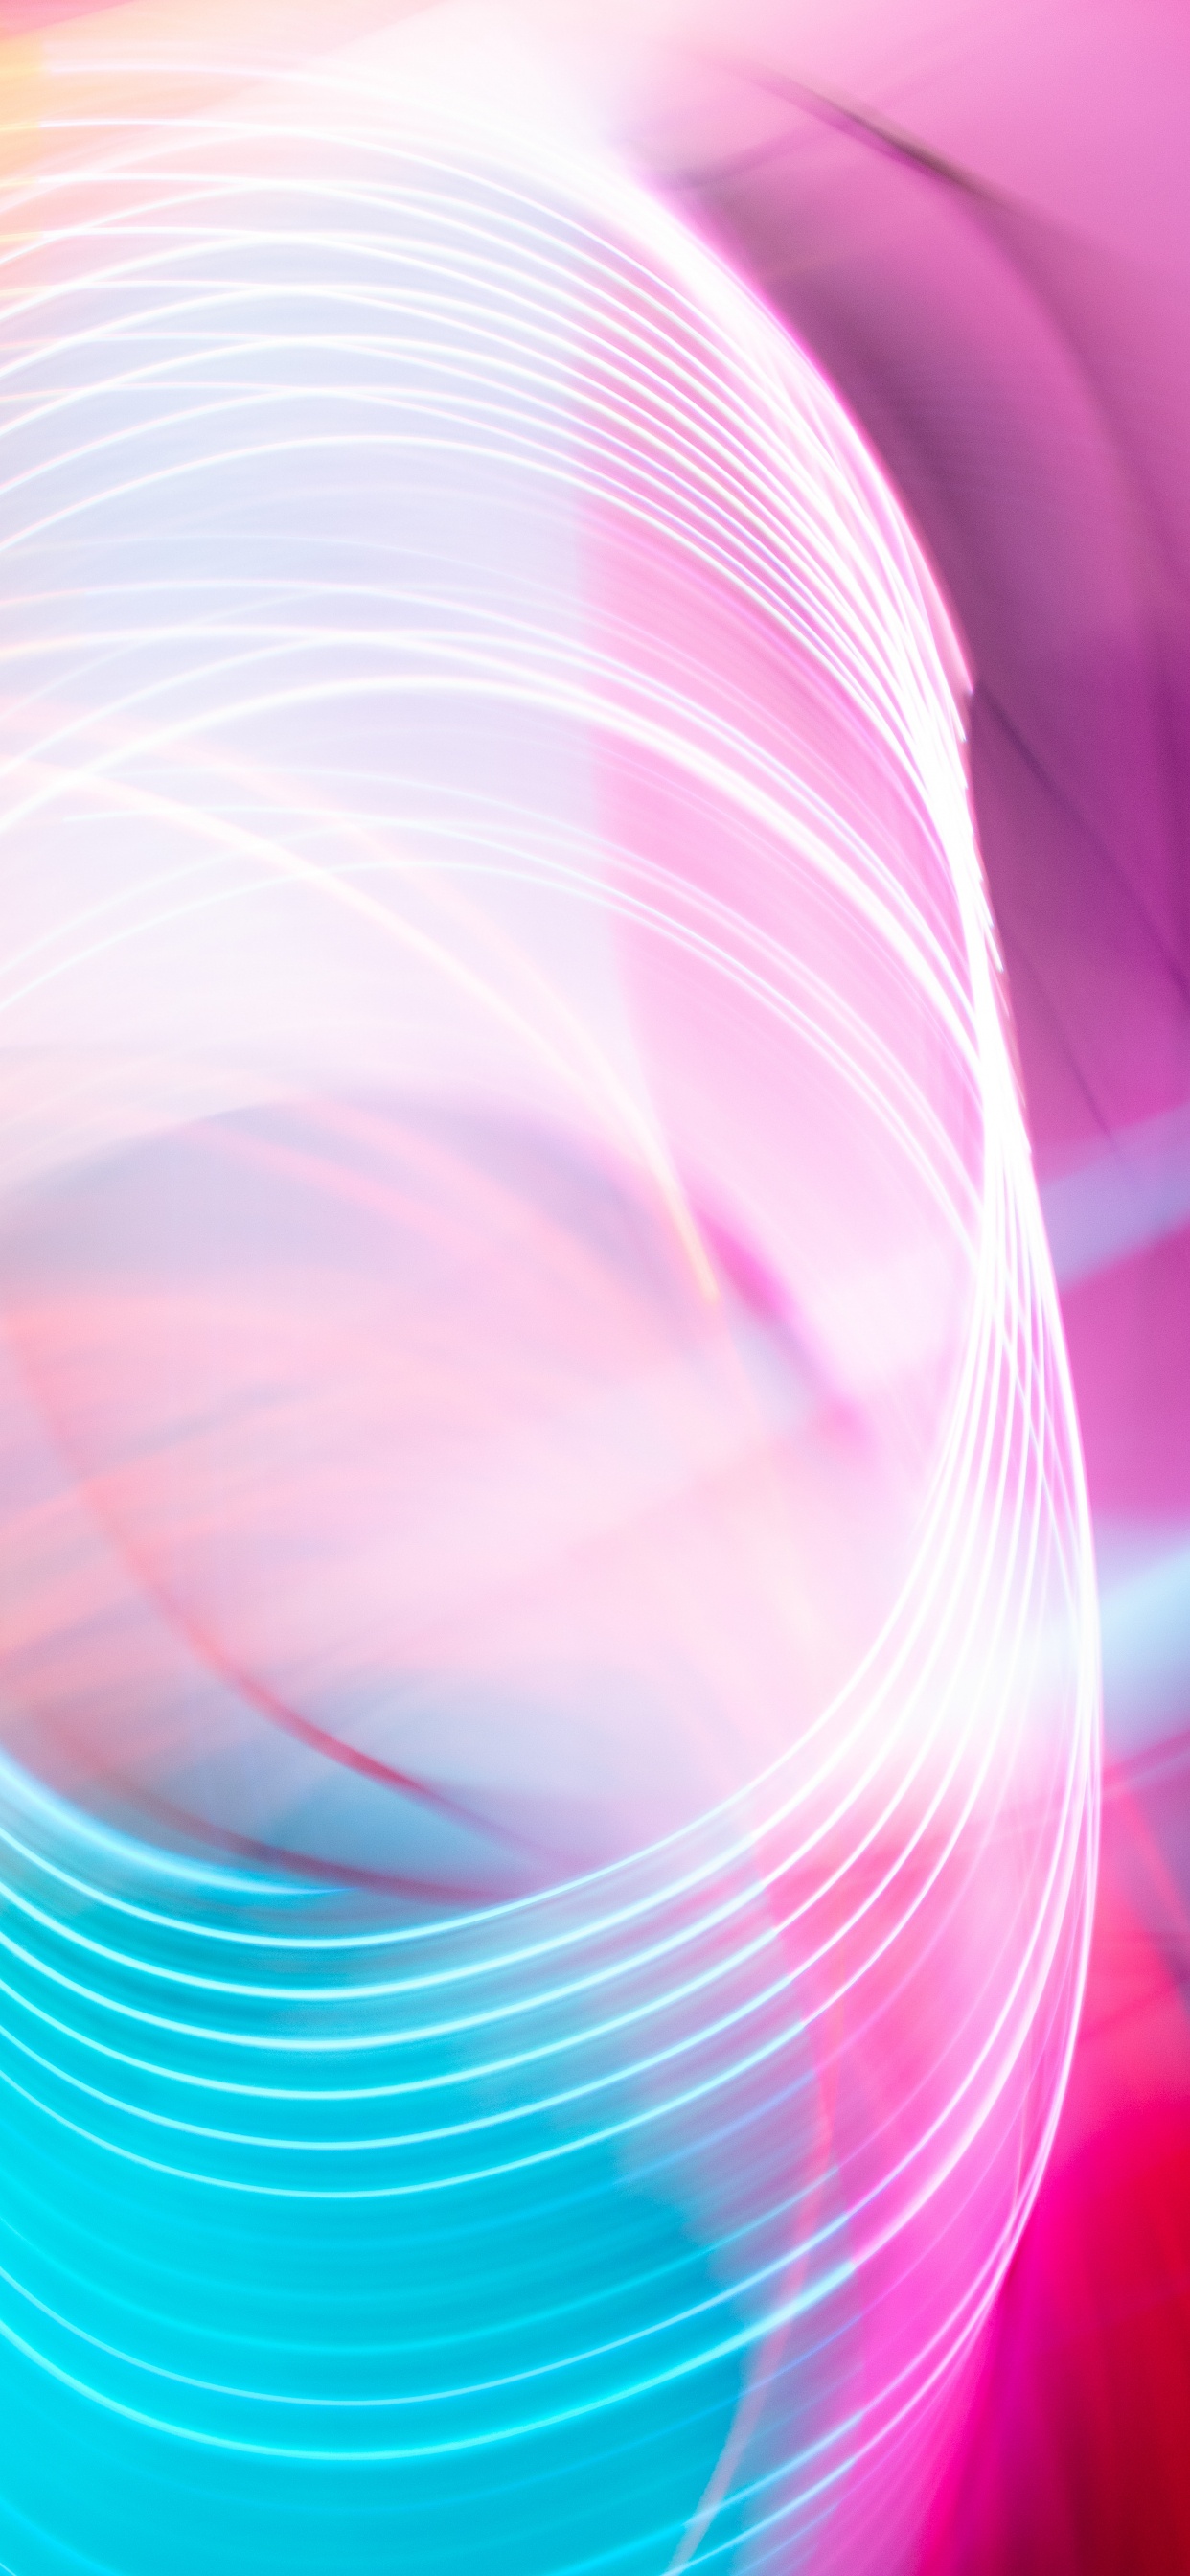 Pink and White Light Digital Wallpaper. Wallpaper in 1242x2688 Resolution